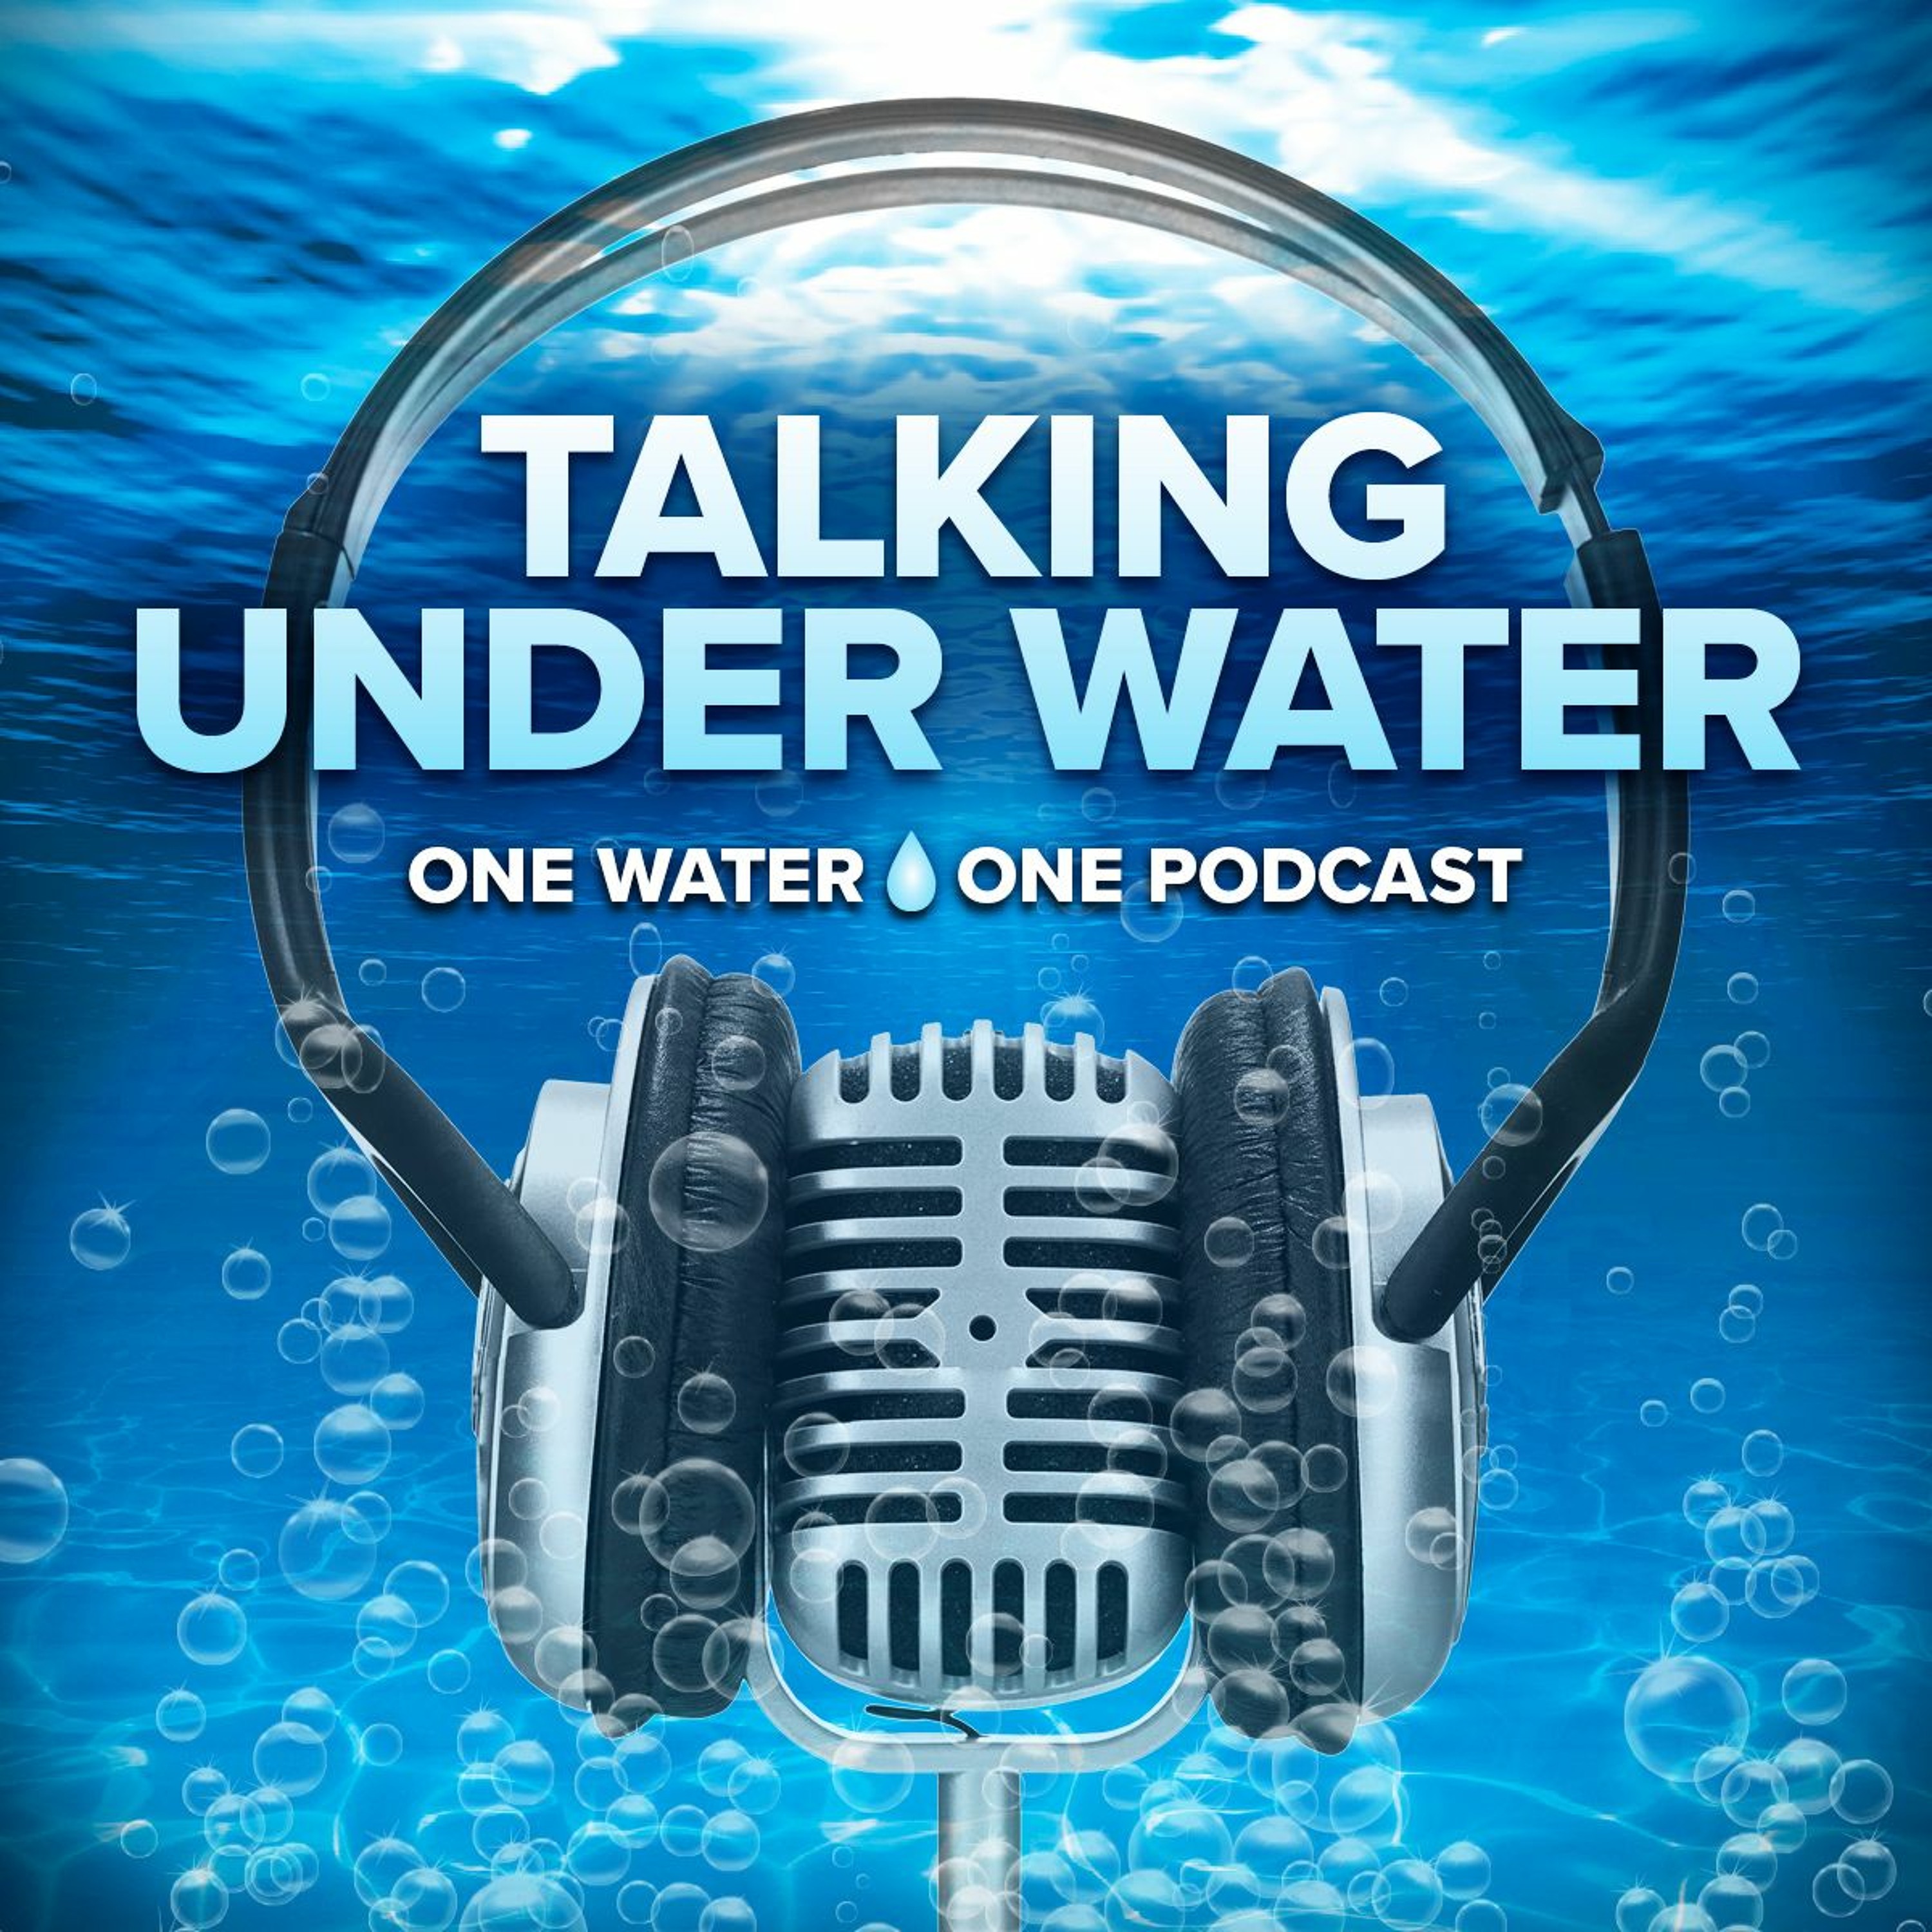 Talking Under Water Episode 24: COVID-19’s Impact on the Water Industry